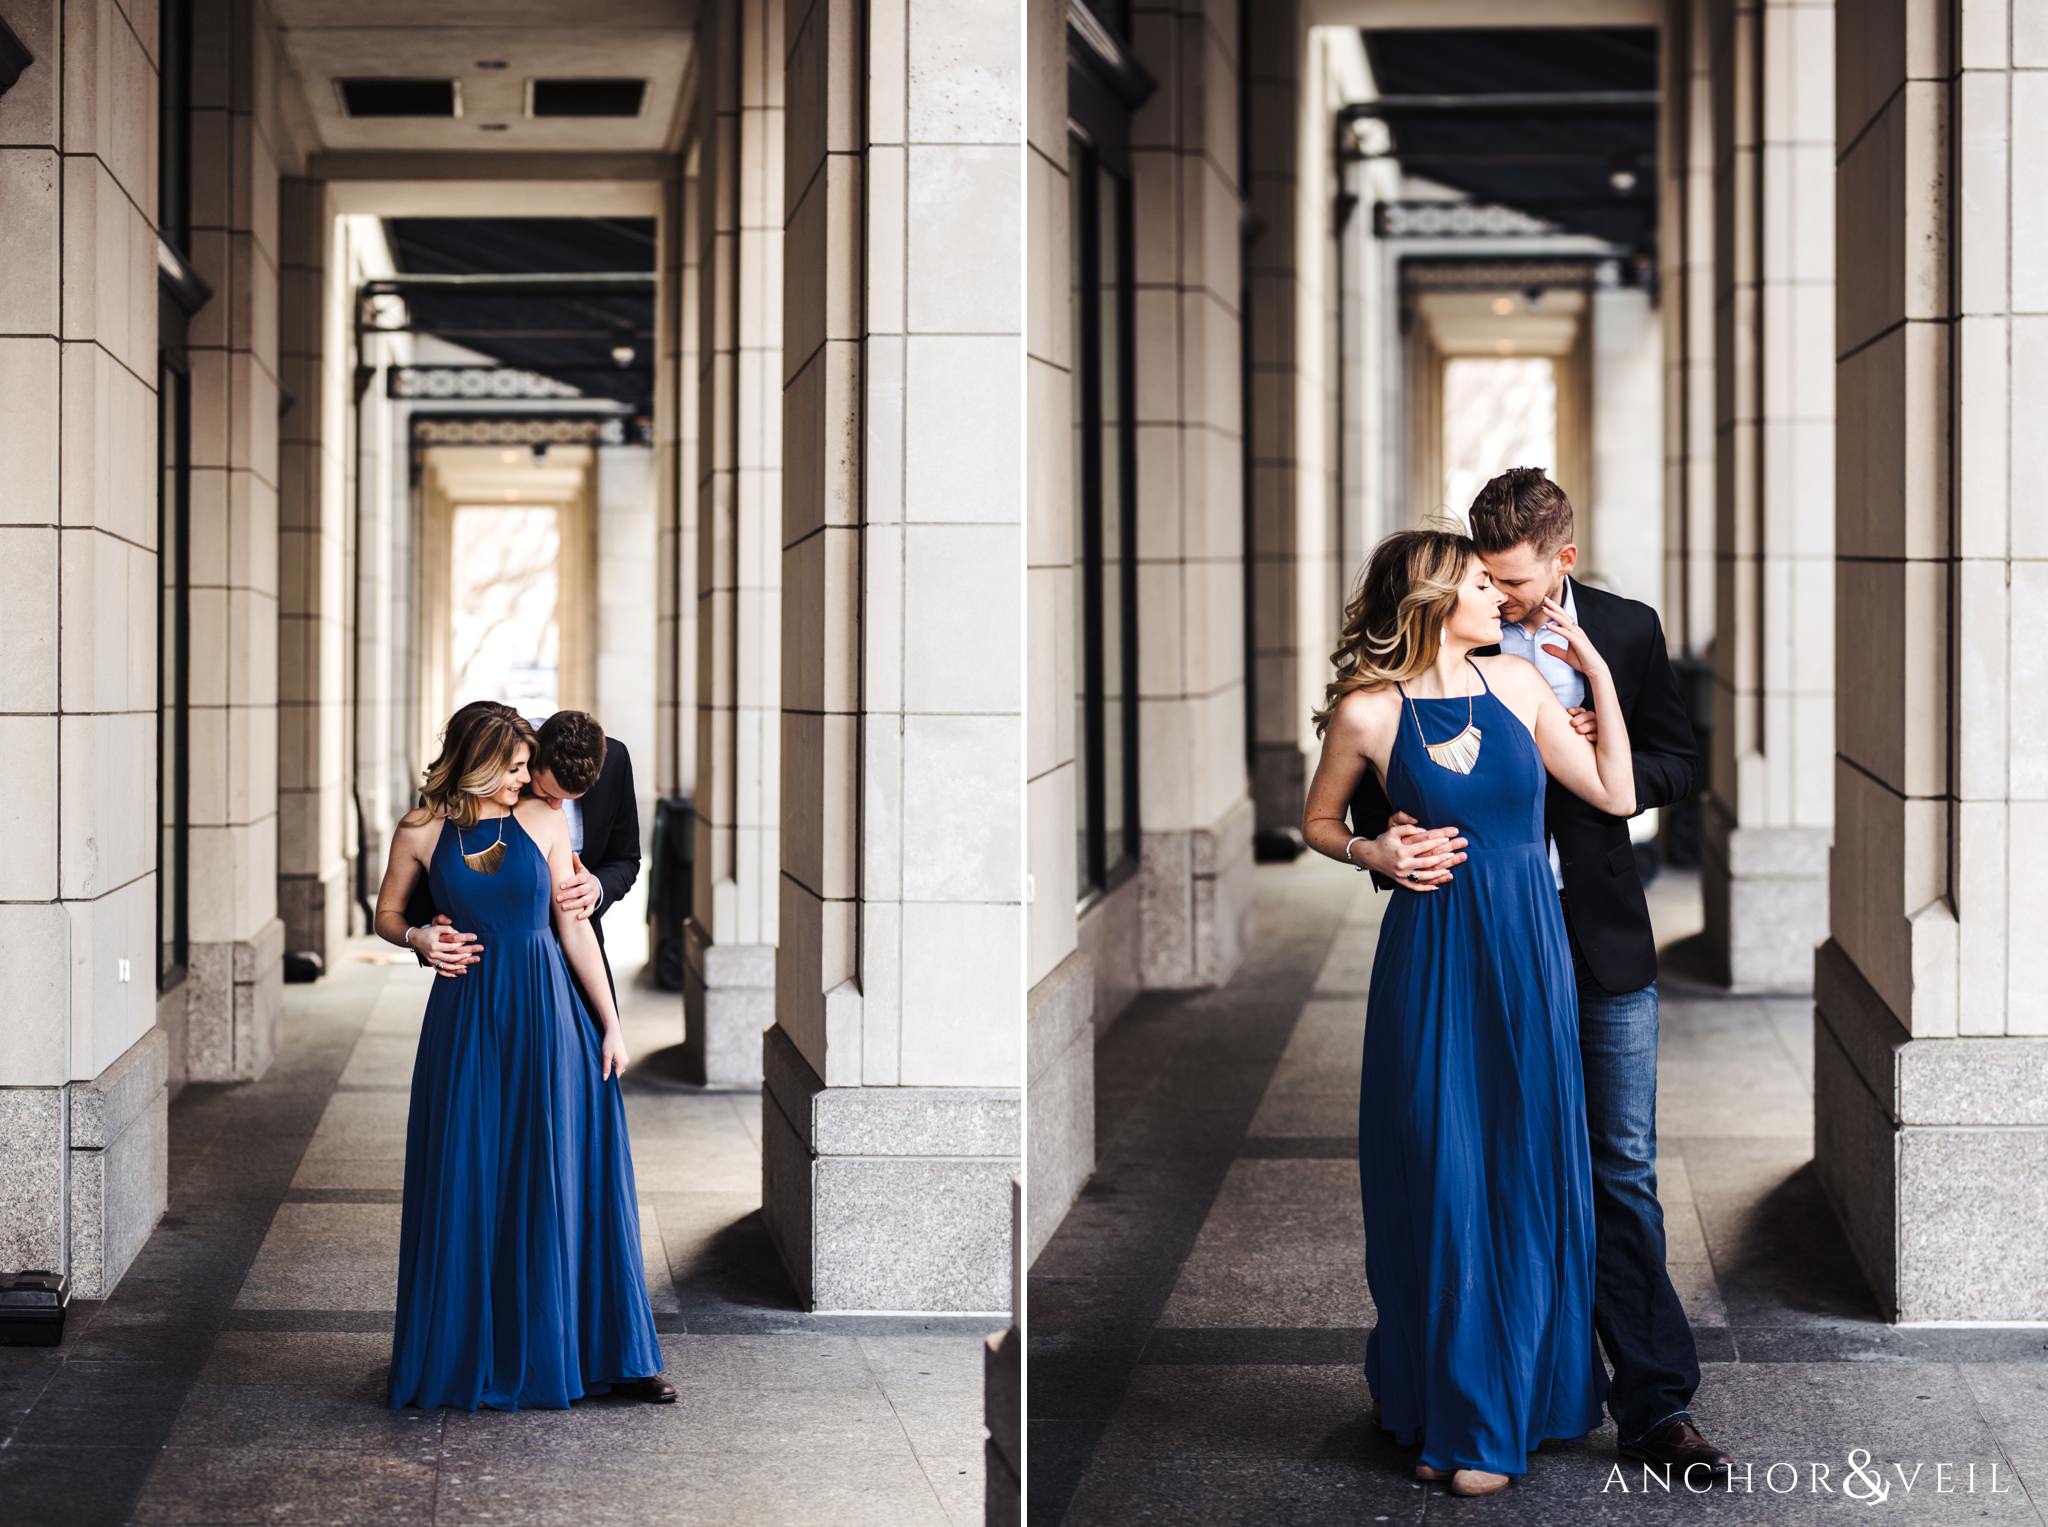 under the architecture during their Scenic Washington DC Engagement Session